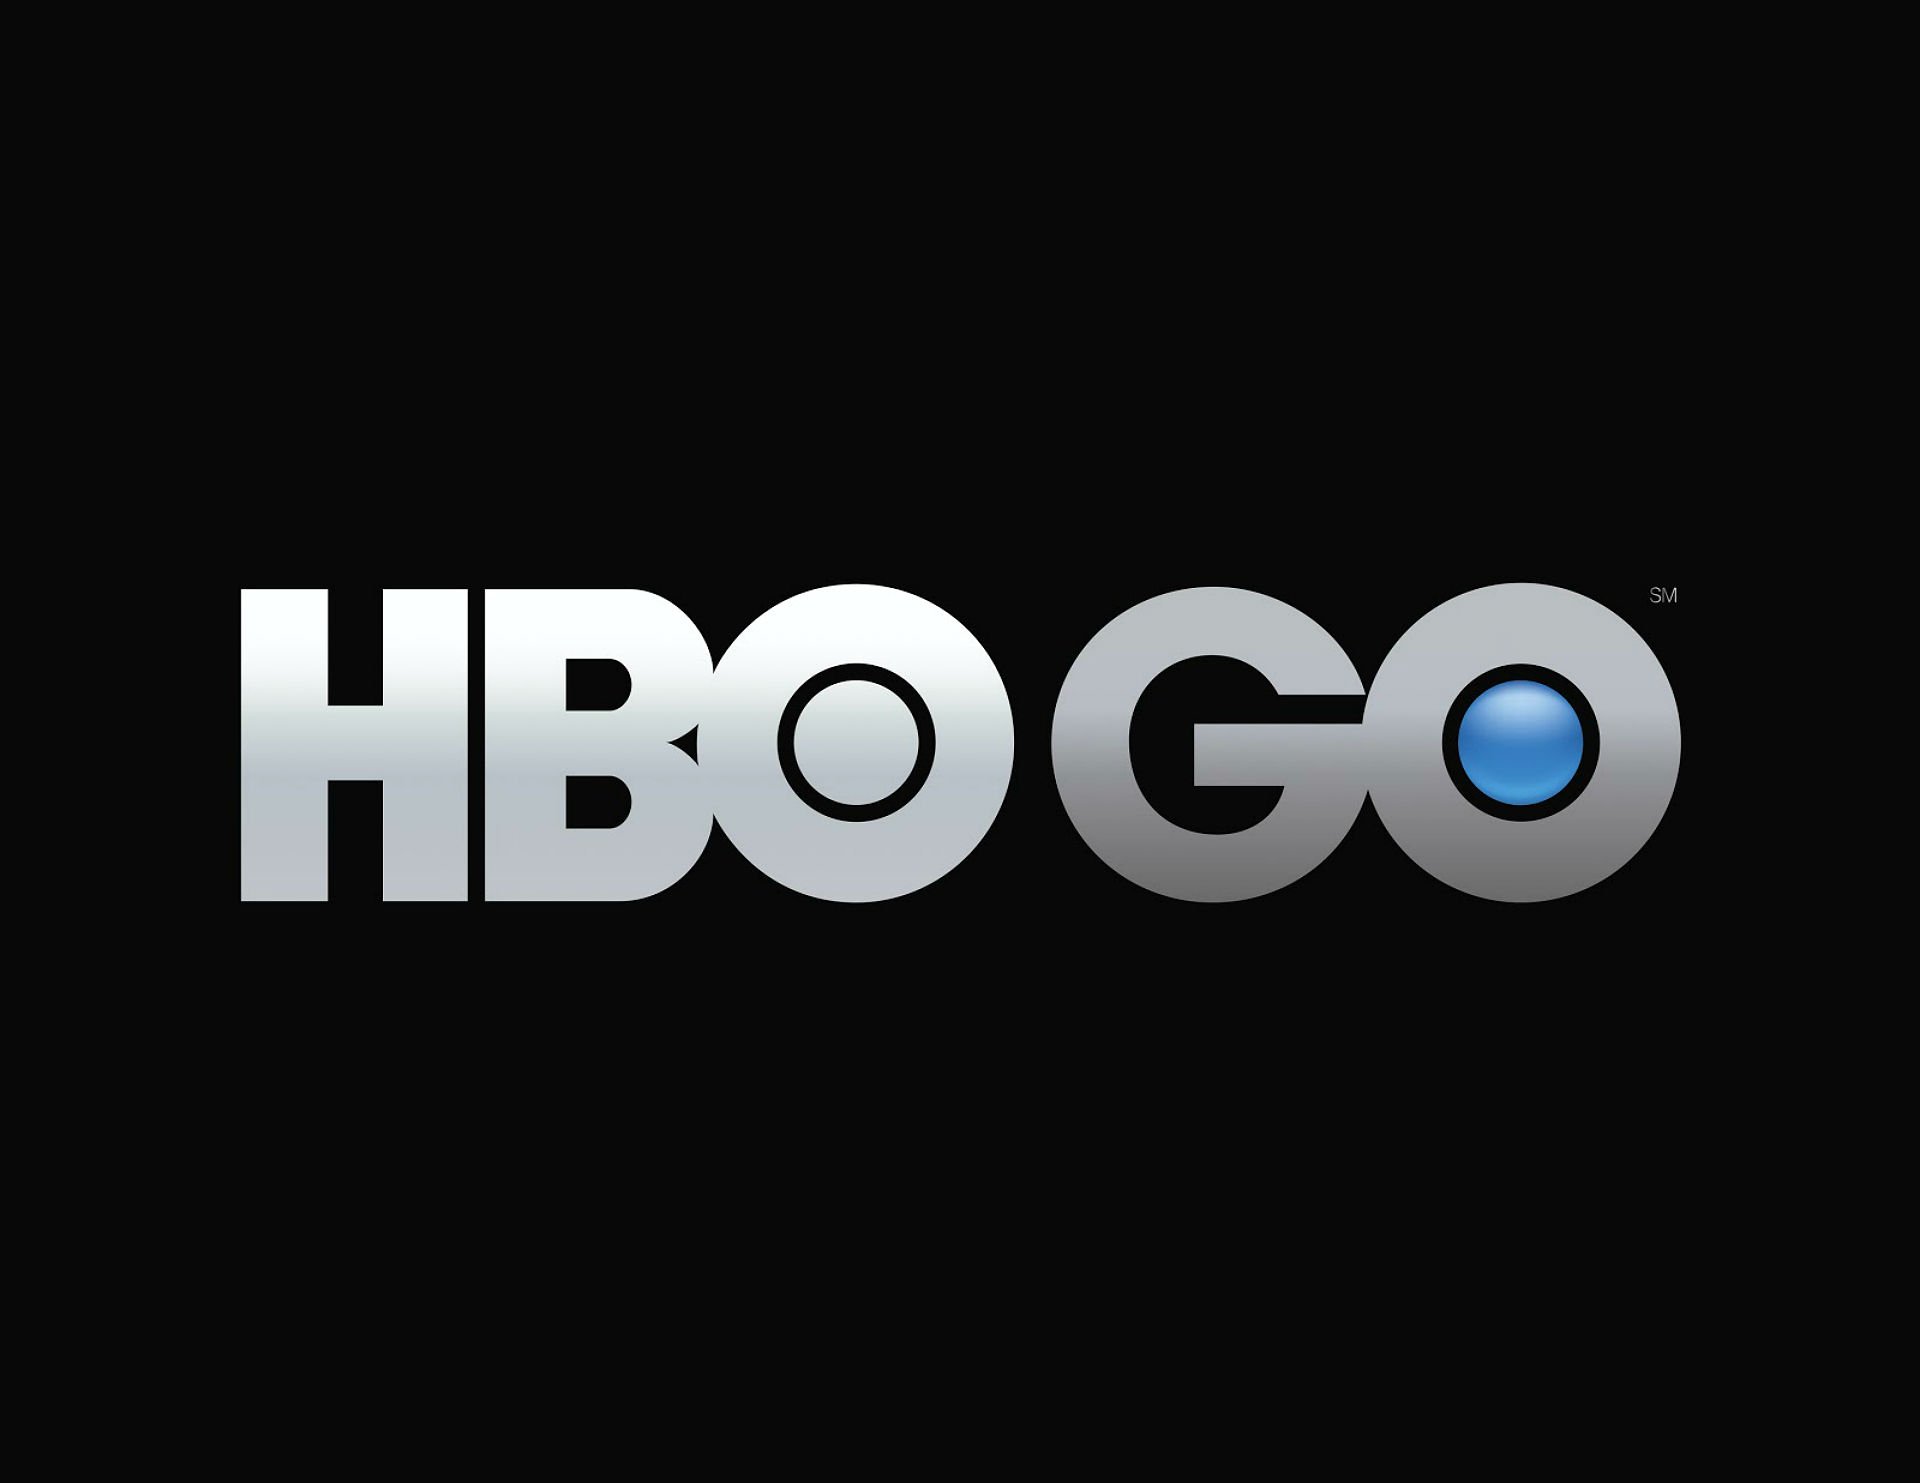 hbo, Logo, Cable, Television, Channel Wallpaper